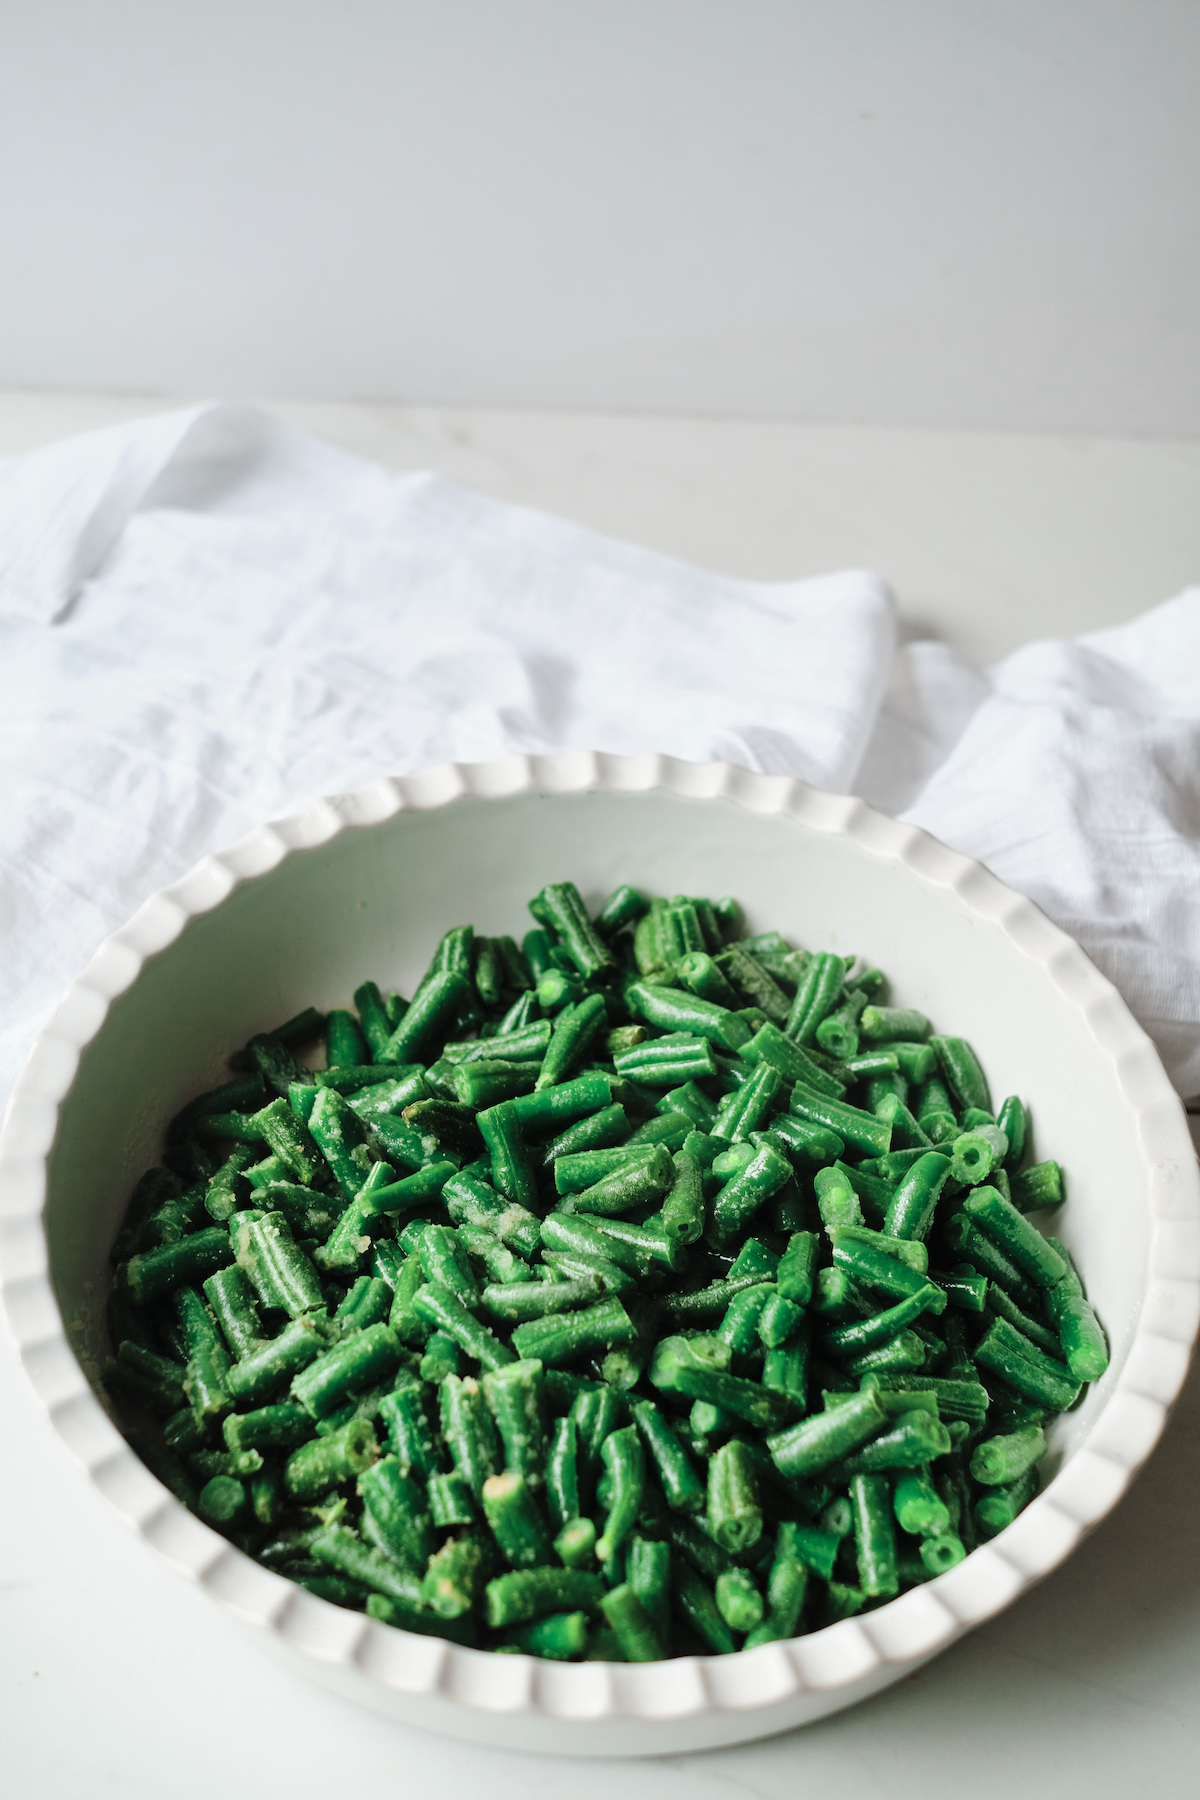 the cooked green beans served in a white dish after completing air fryer frozen vegetables recipe